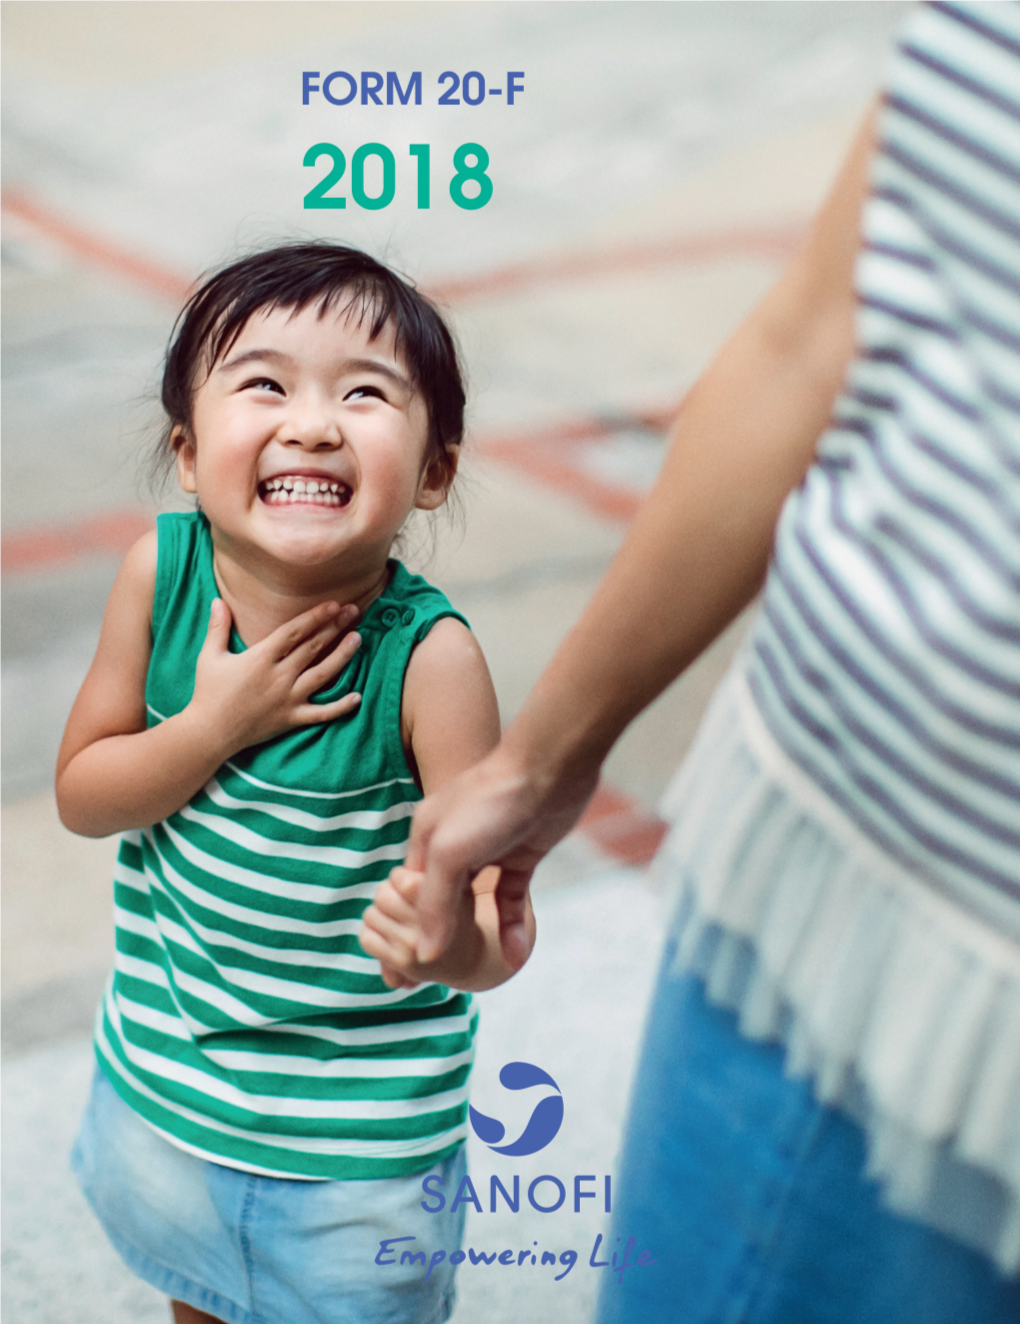 Annual Report on Form 20-F 2018